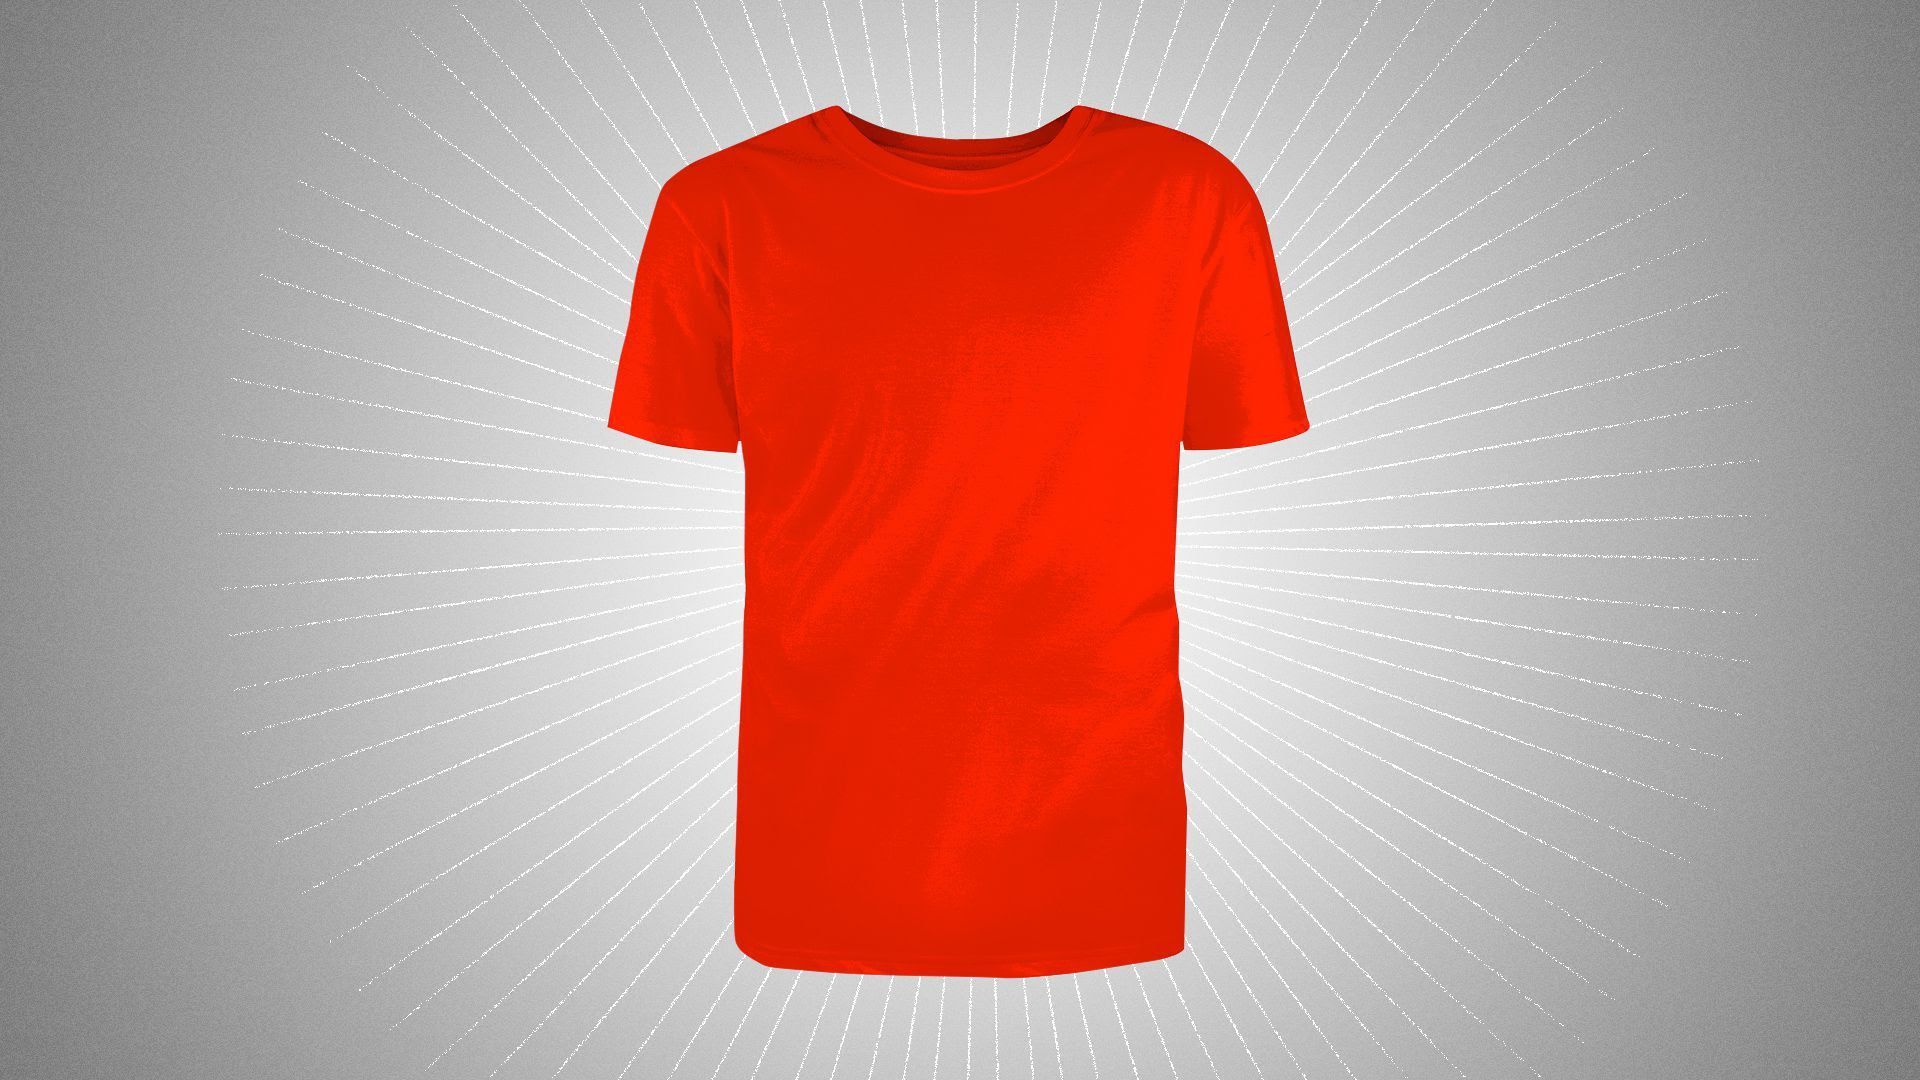 An illustration of a red shirt 